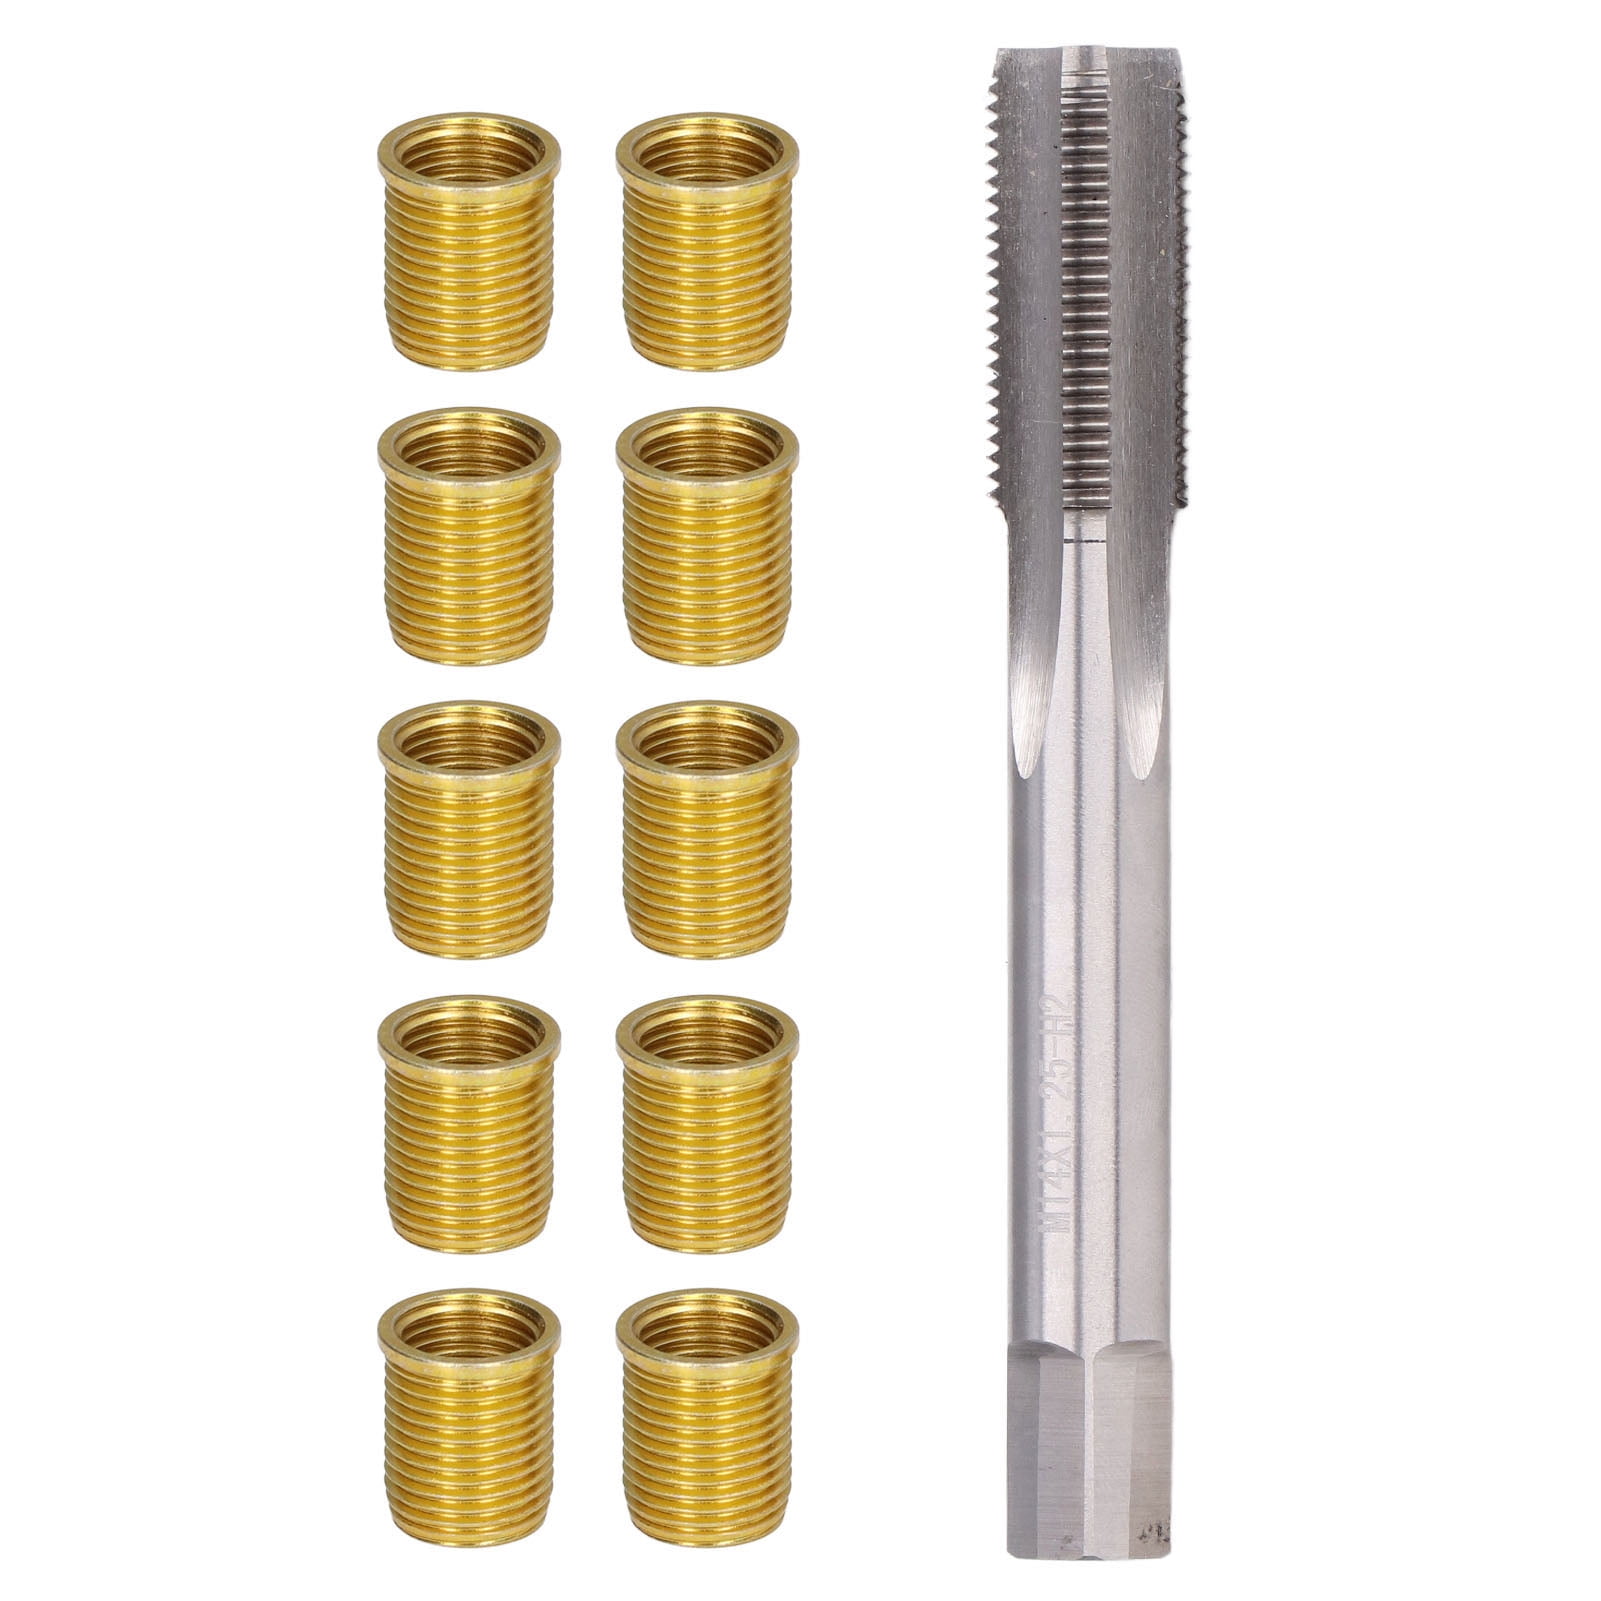 Spark Plug Thread Repair Tools High Speed Steel Tap Spark Plug with M12x1.25 Inserts and M14x1.25 Tap Kit for Automotive Engine Repair 